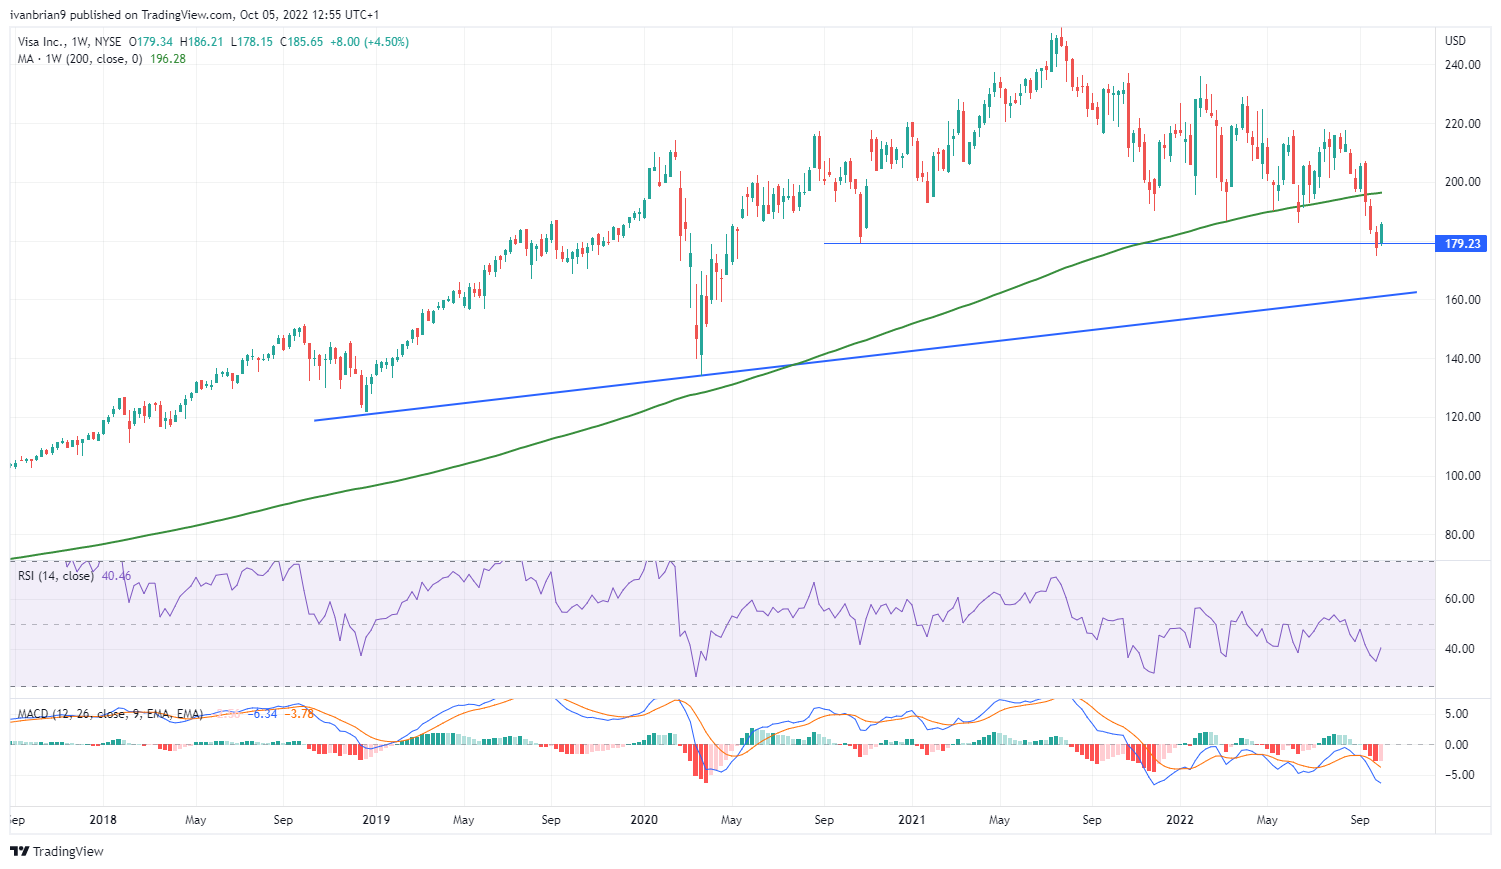 Visa stock daily chart draws key support levels